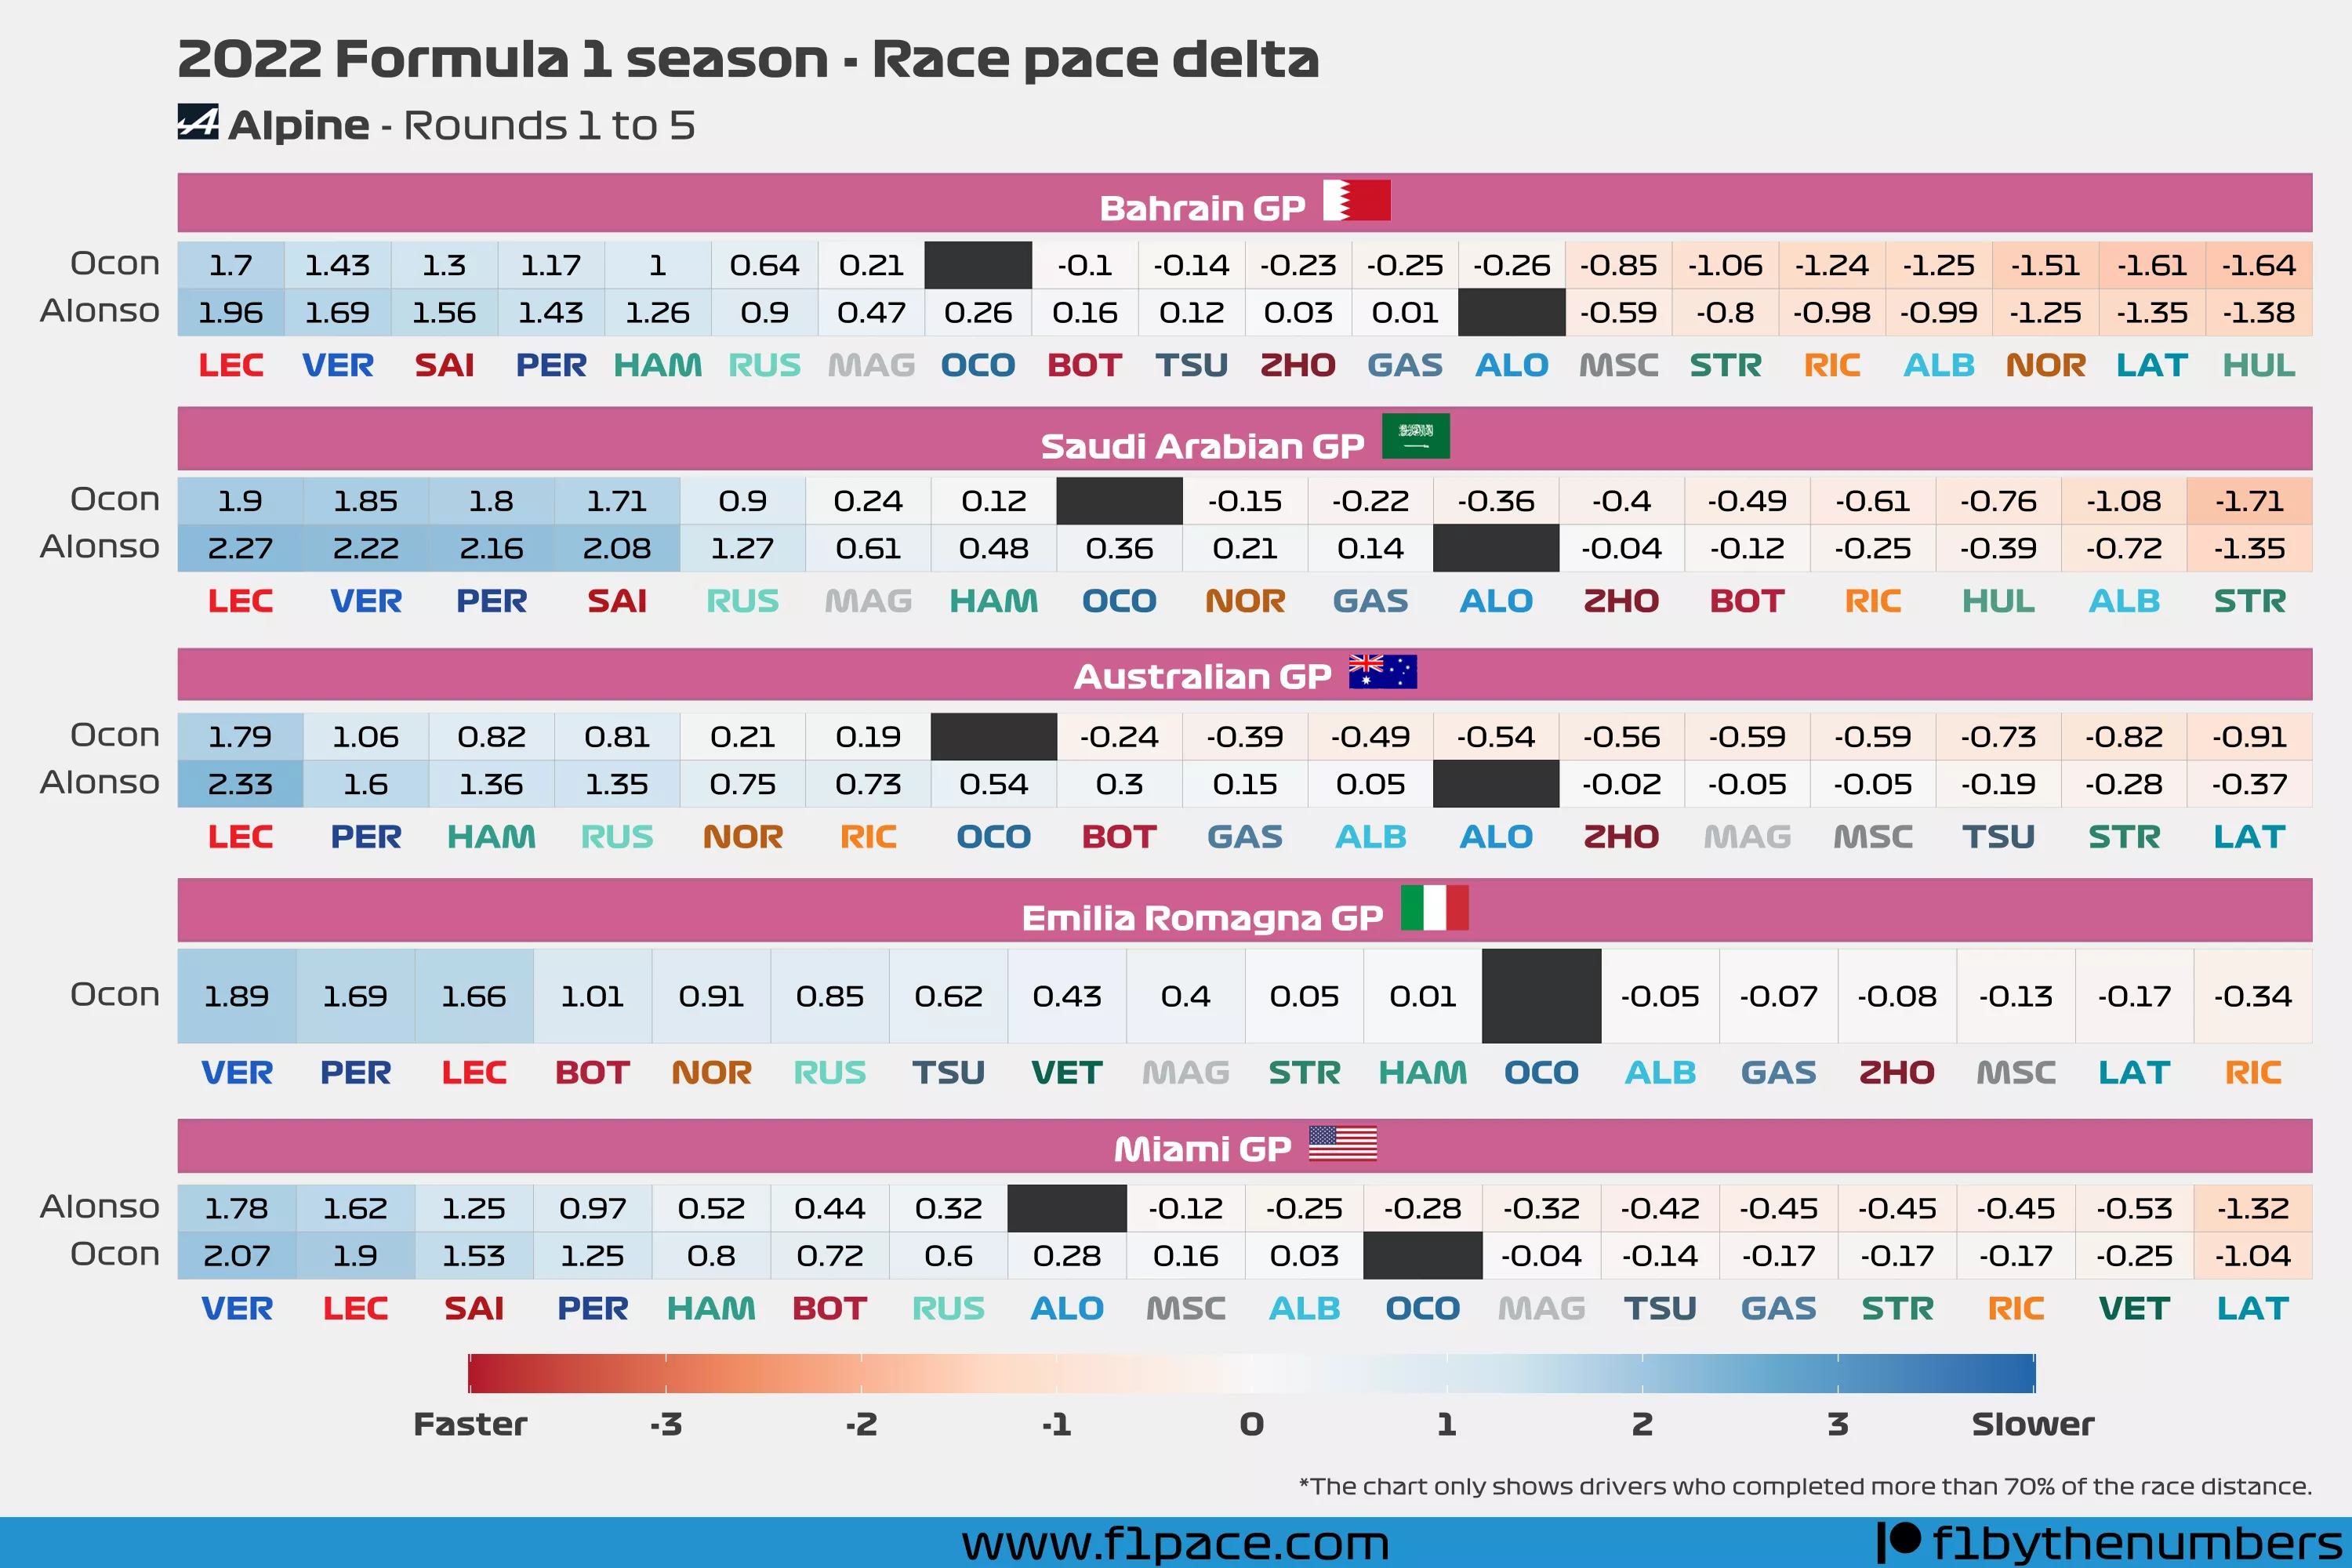 Race pace delta: Rounds to 1 to 5 - Alpine